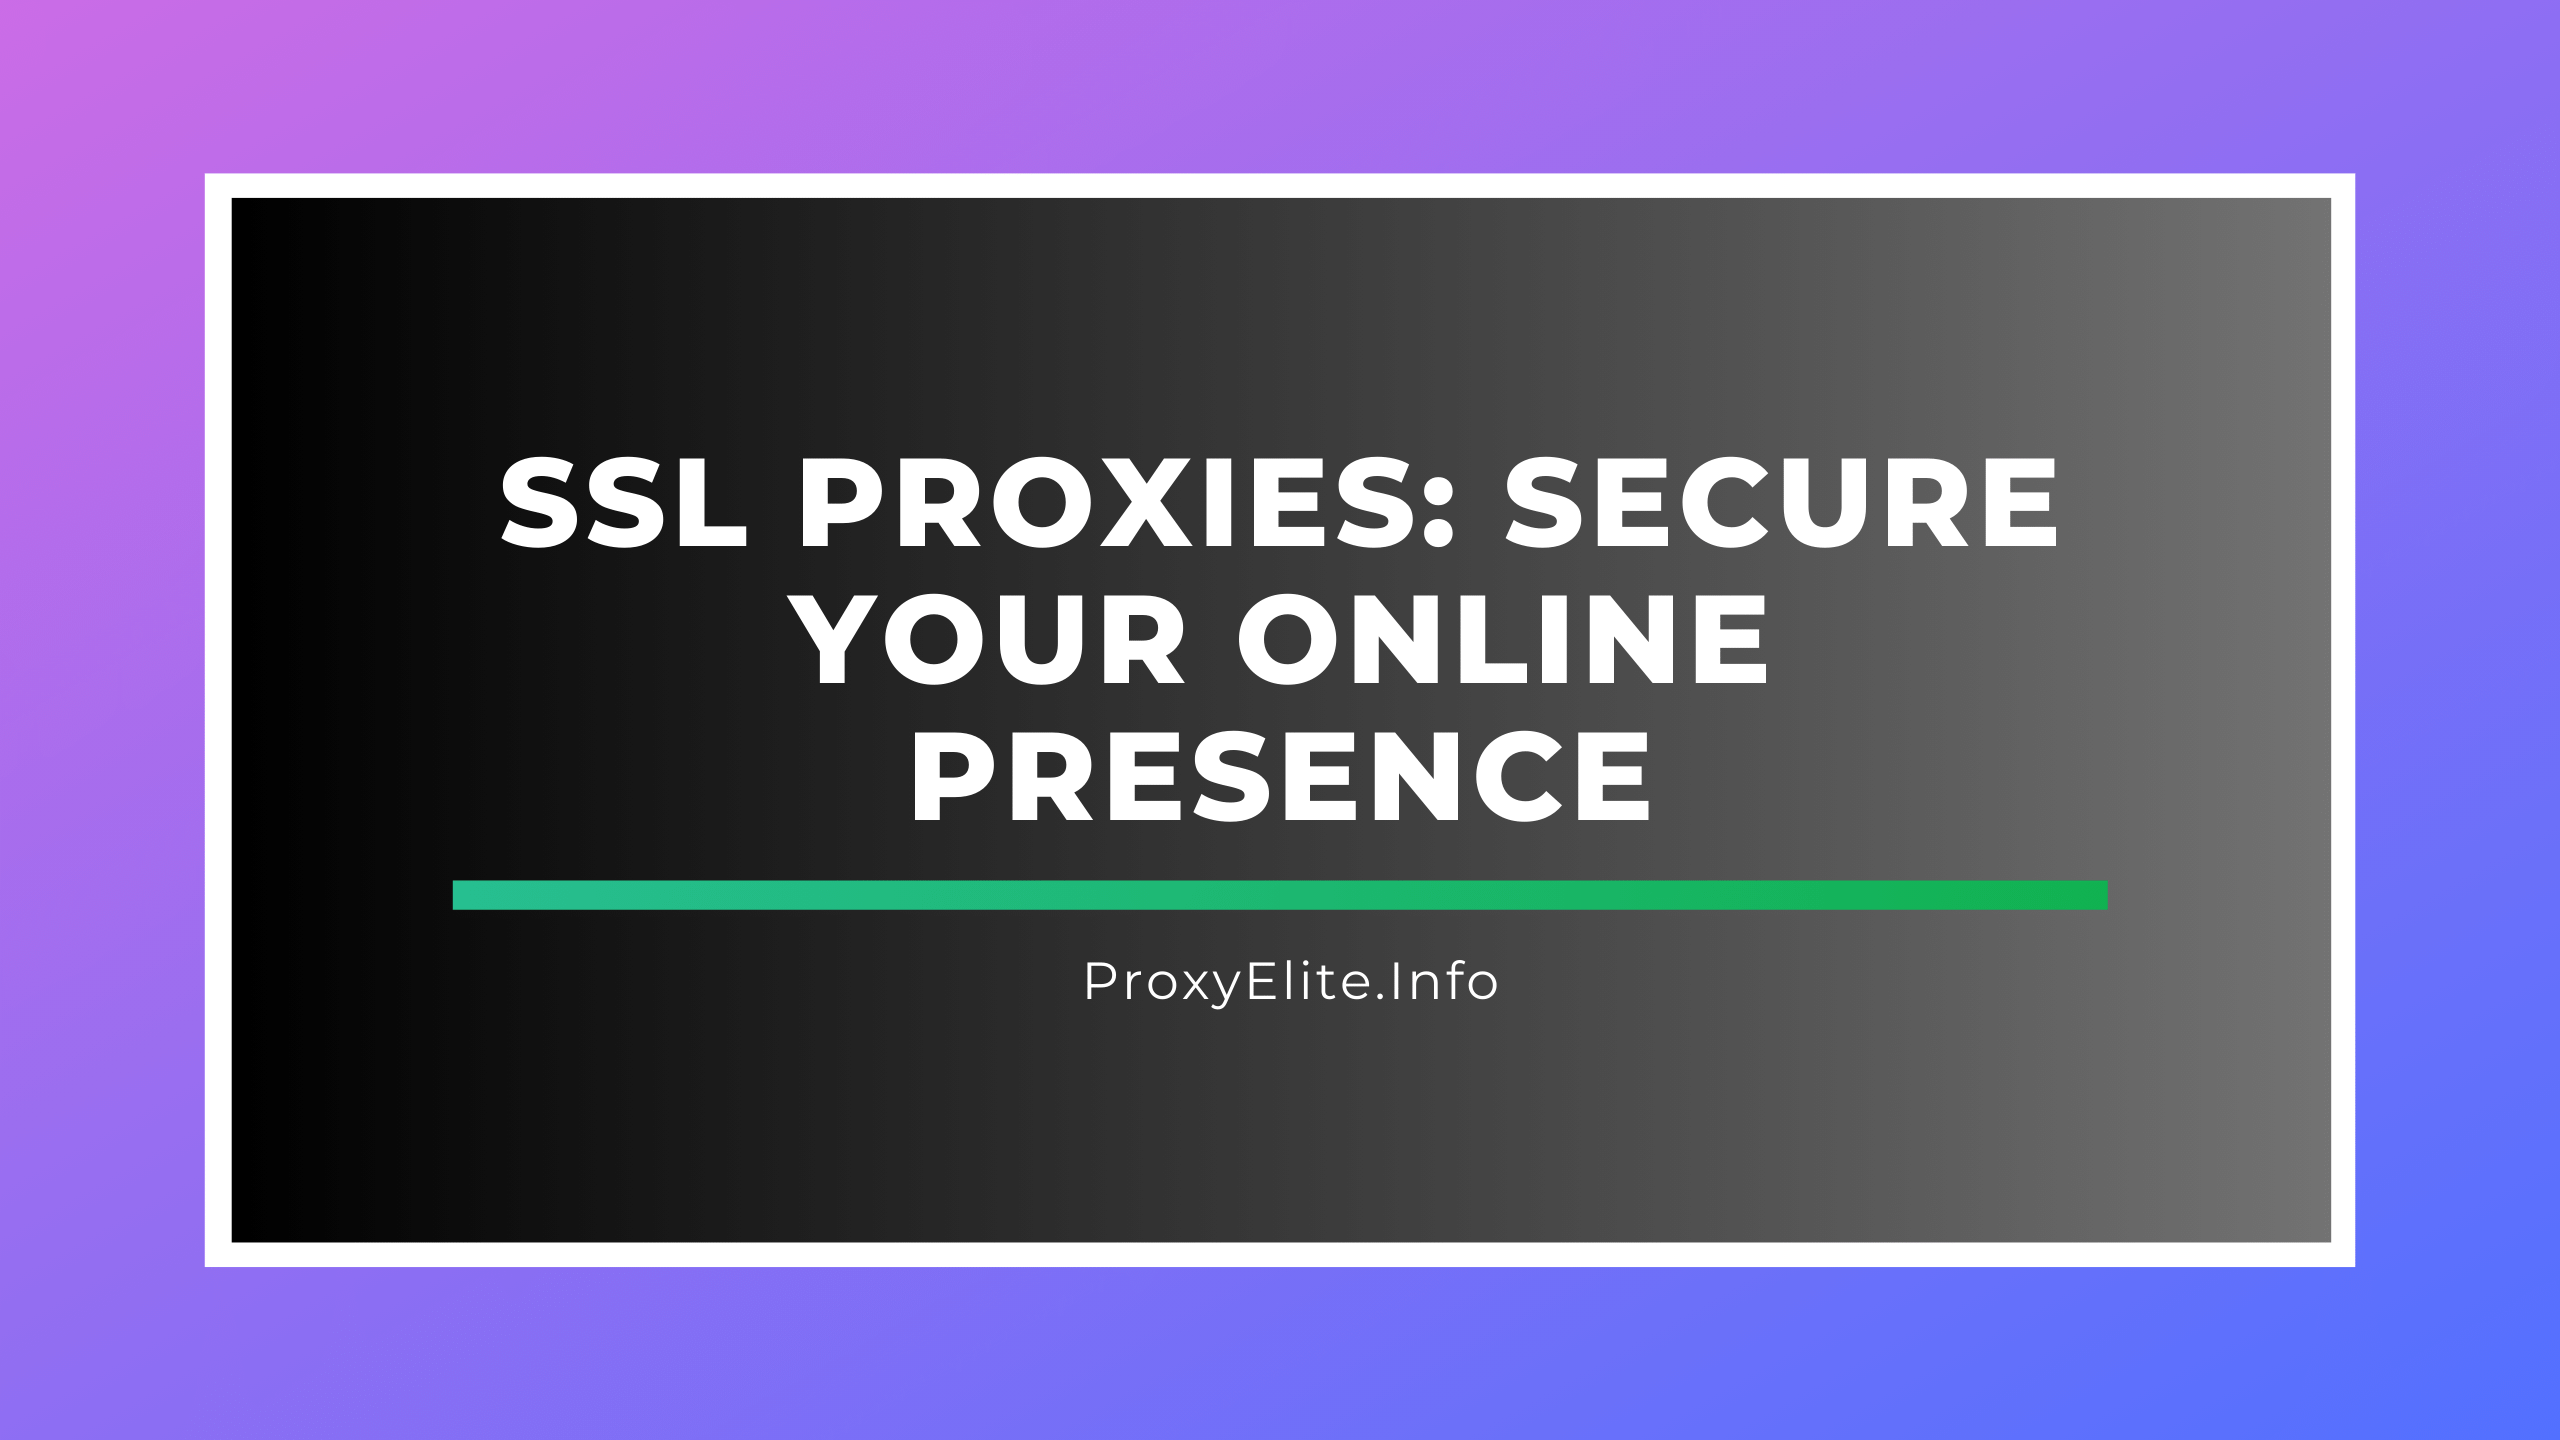 SSL Proxies: Secure Your Online Presence